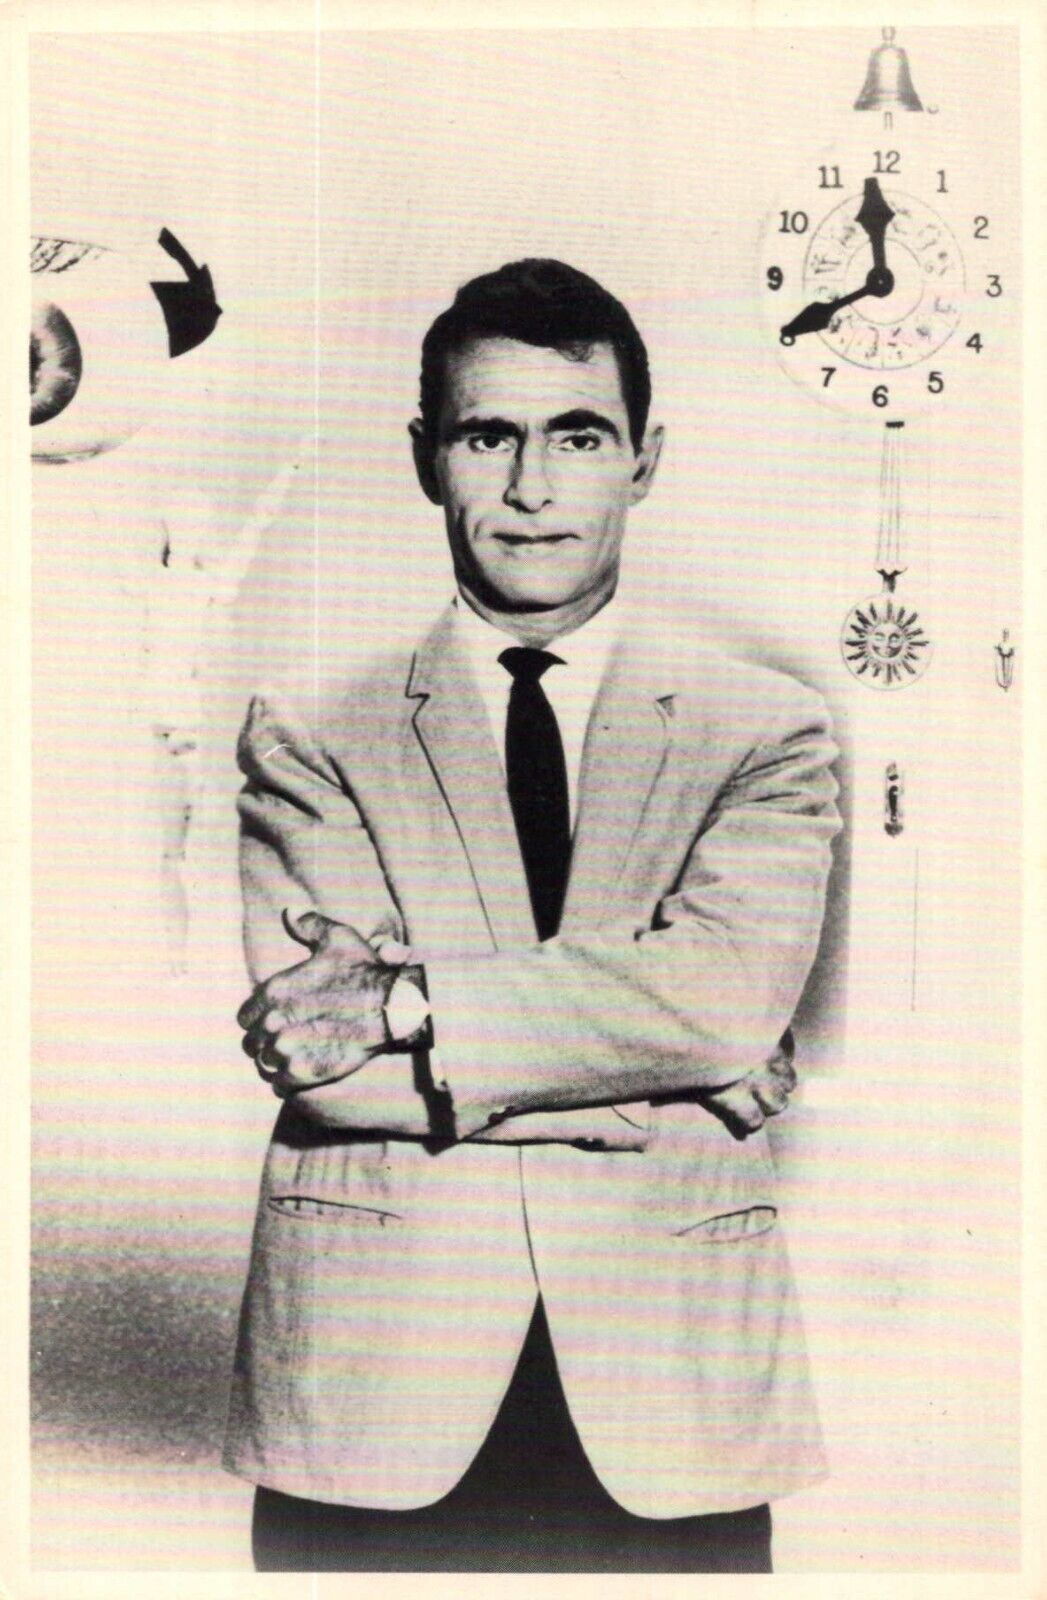 Twilight Zone Creator Rod Serling with Elements Vintage Postcard